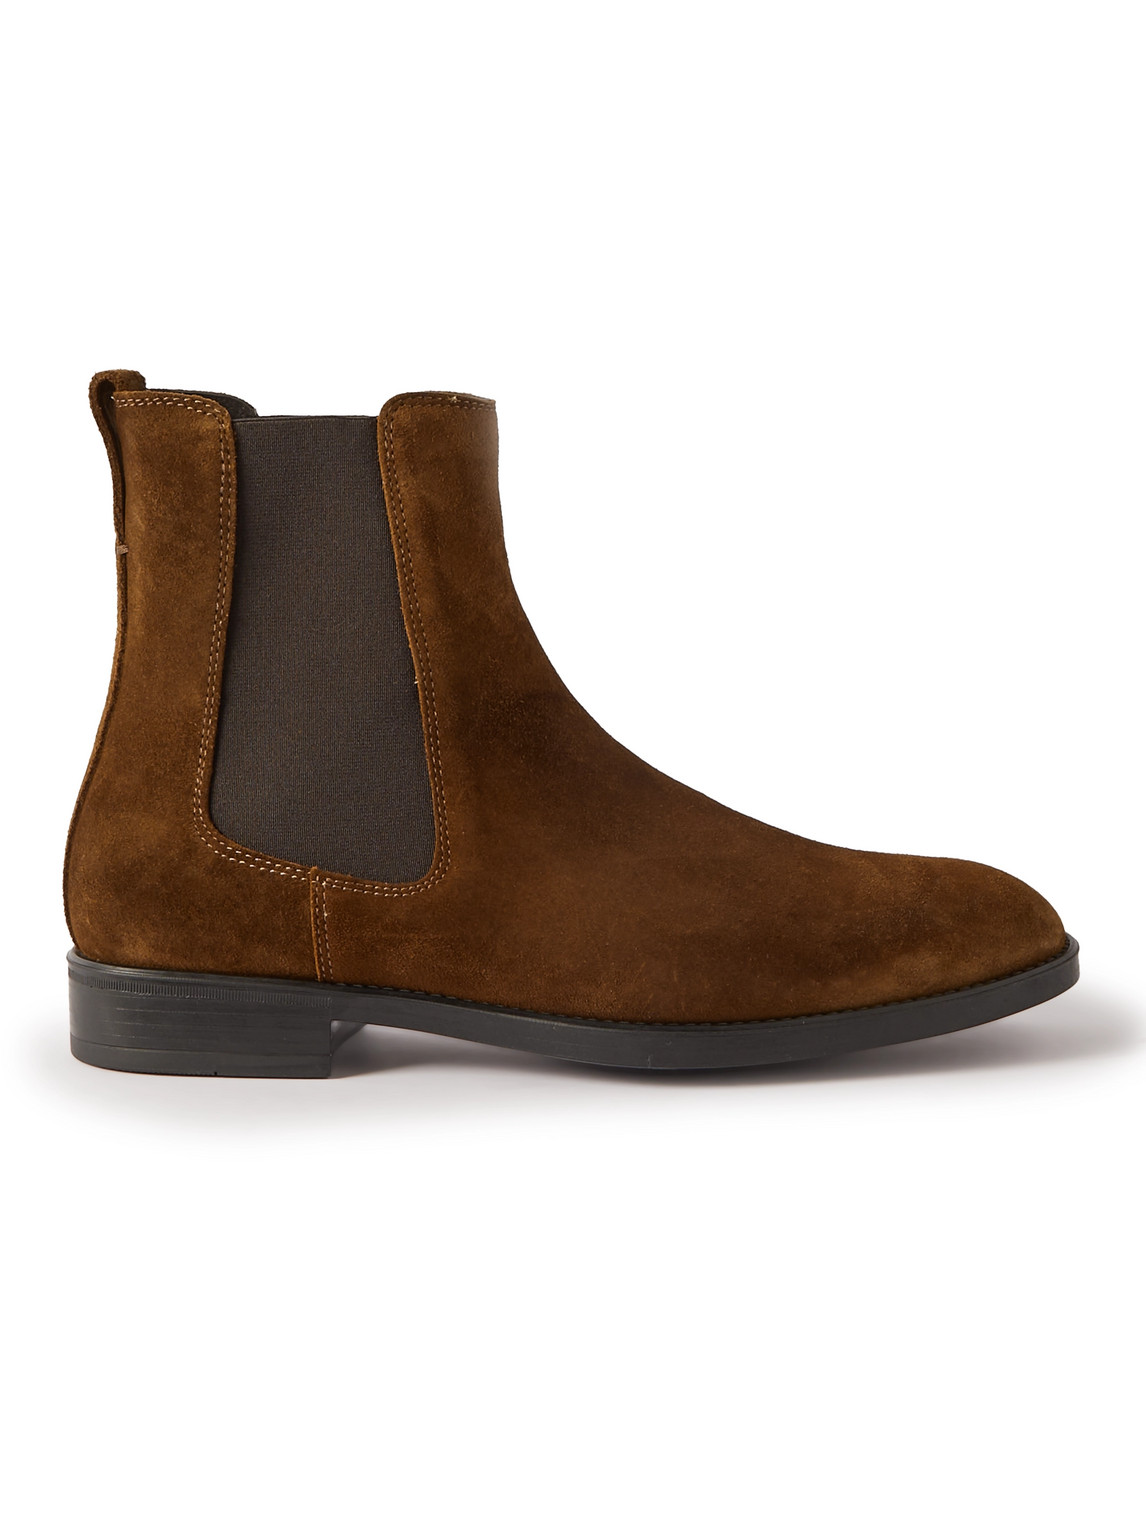 TOM FORD ROBERT SUEDE CHELSEA BOOTS